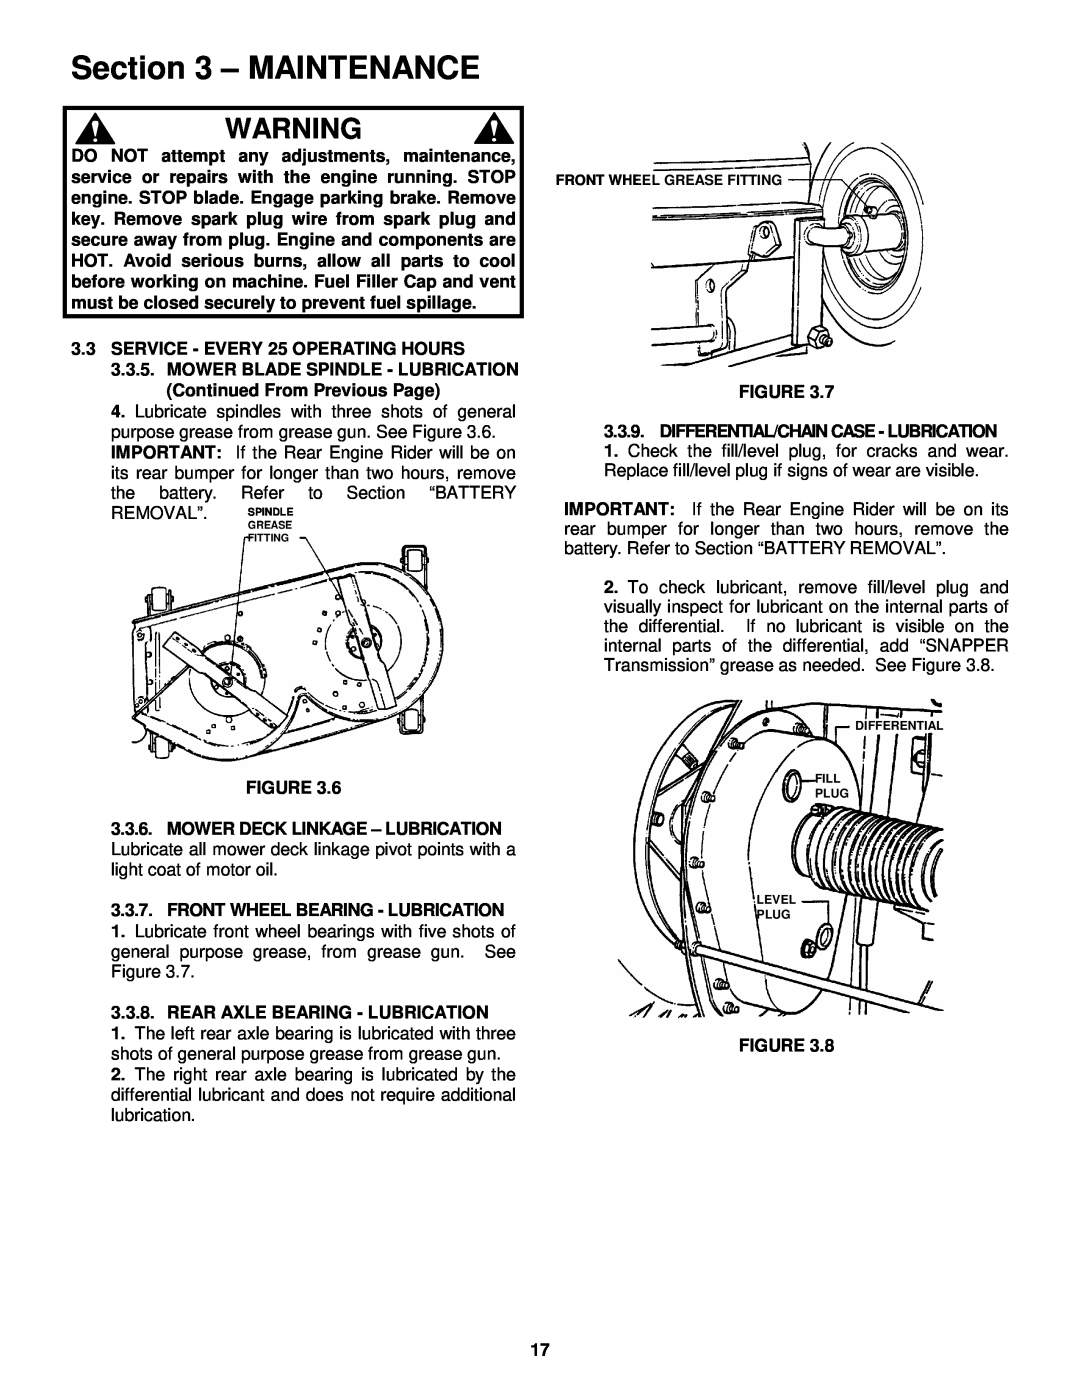 Snapper 421823BVE, W421623BVE important safety instructions Maintenance, Removal”. Spindle 